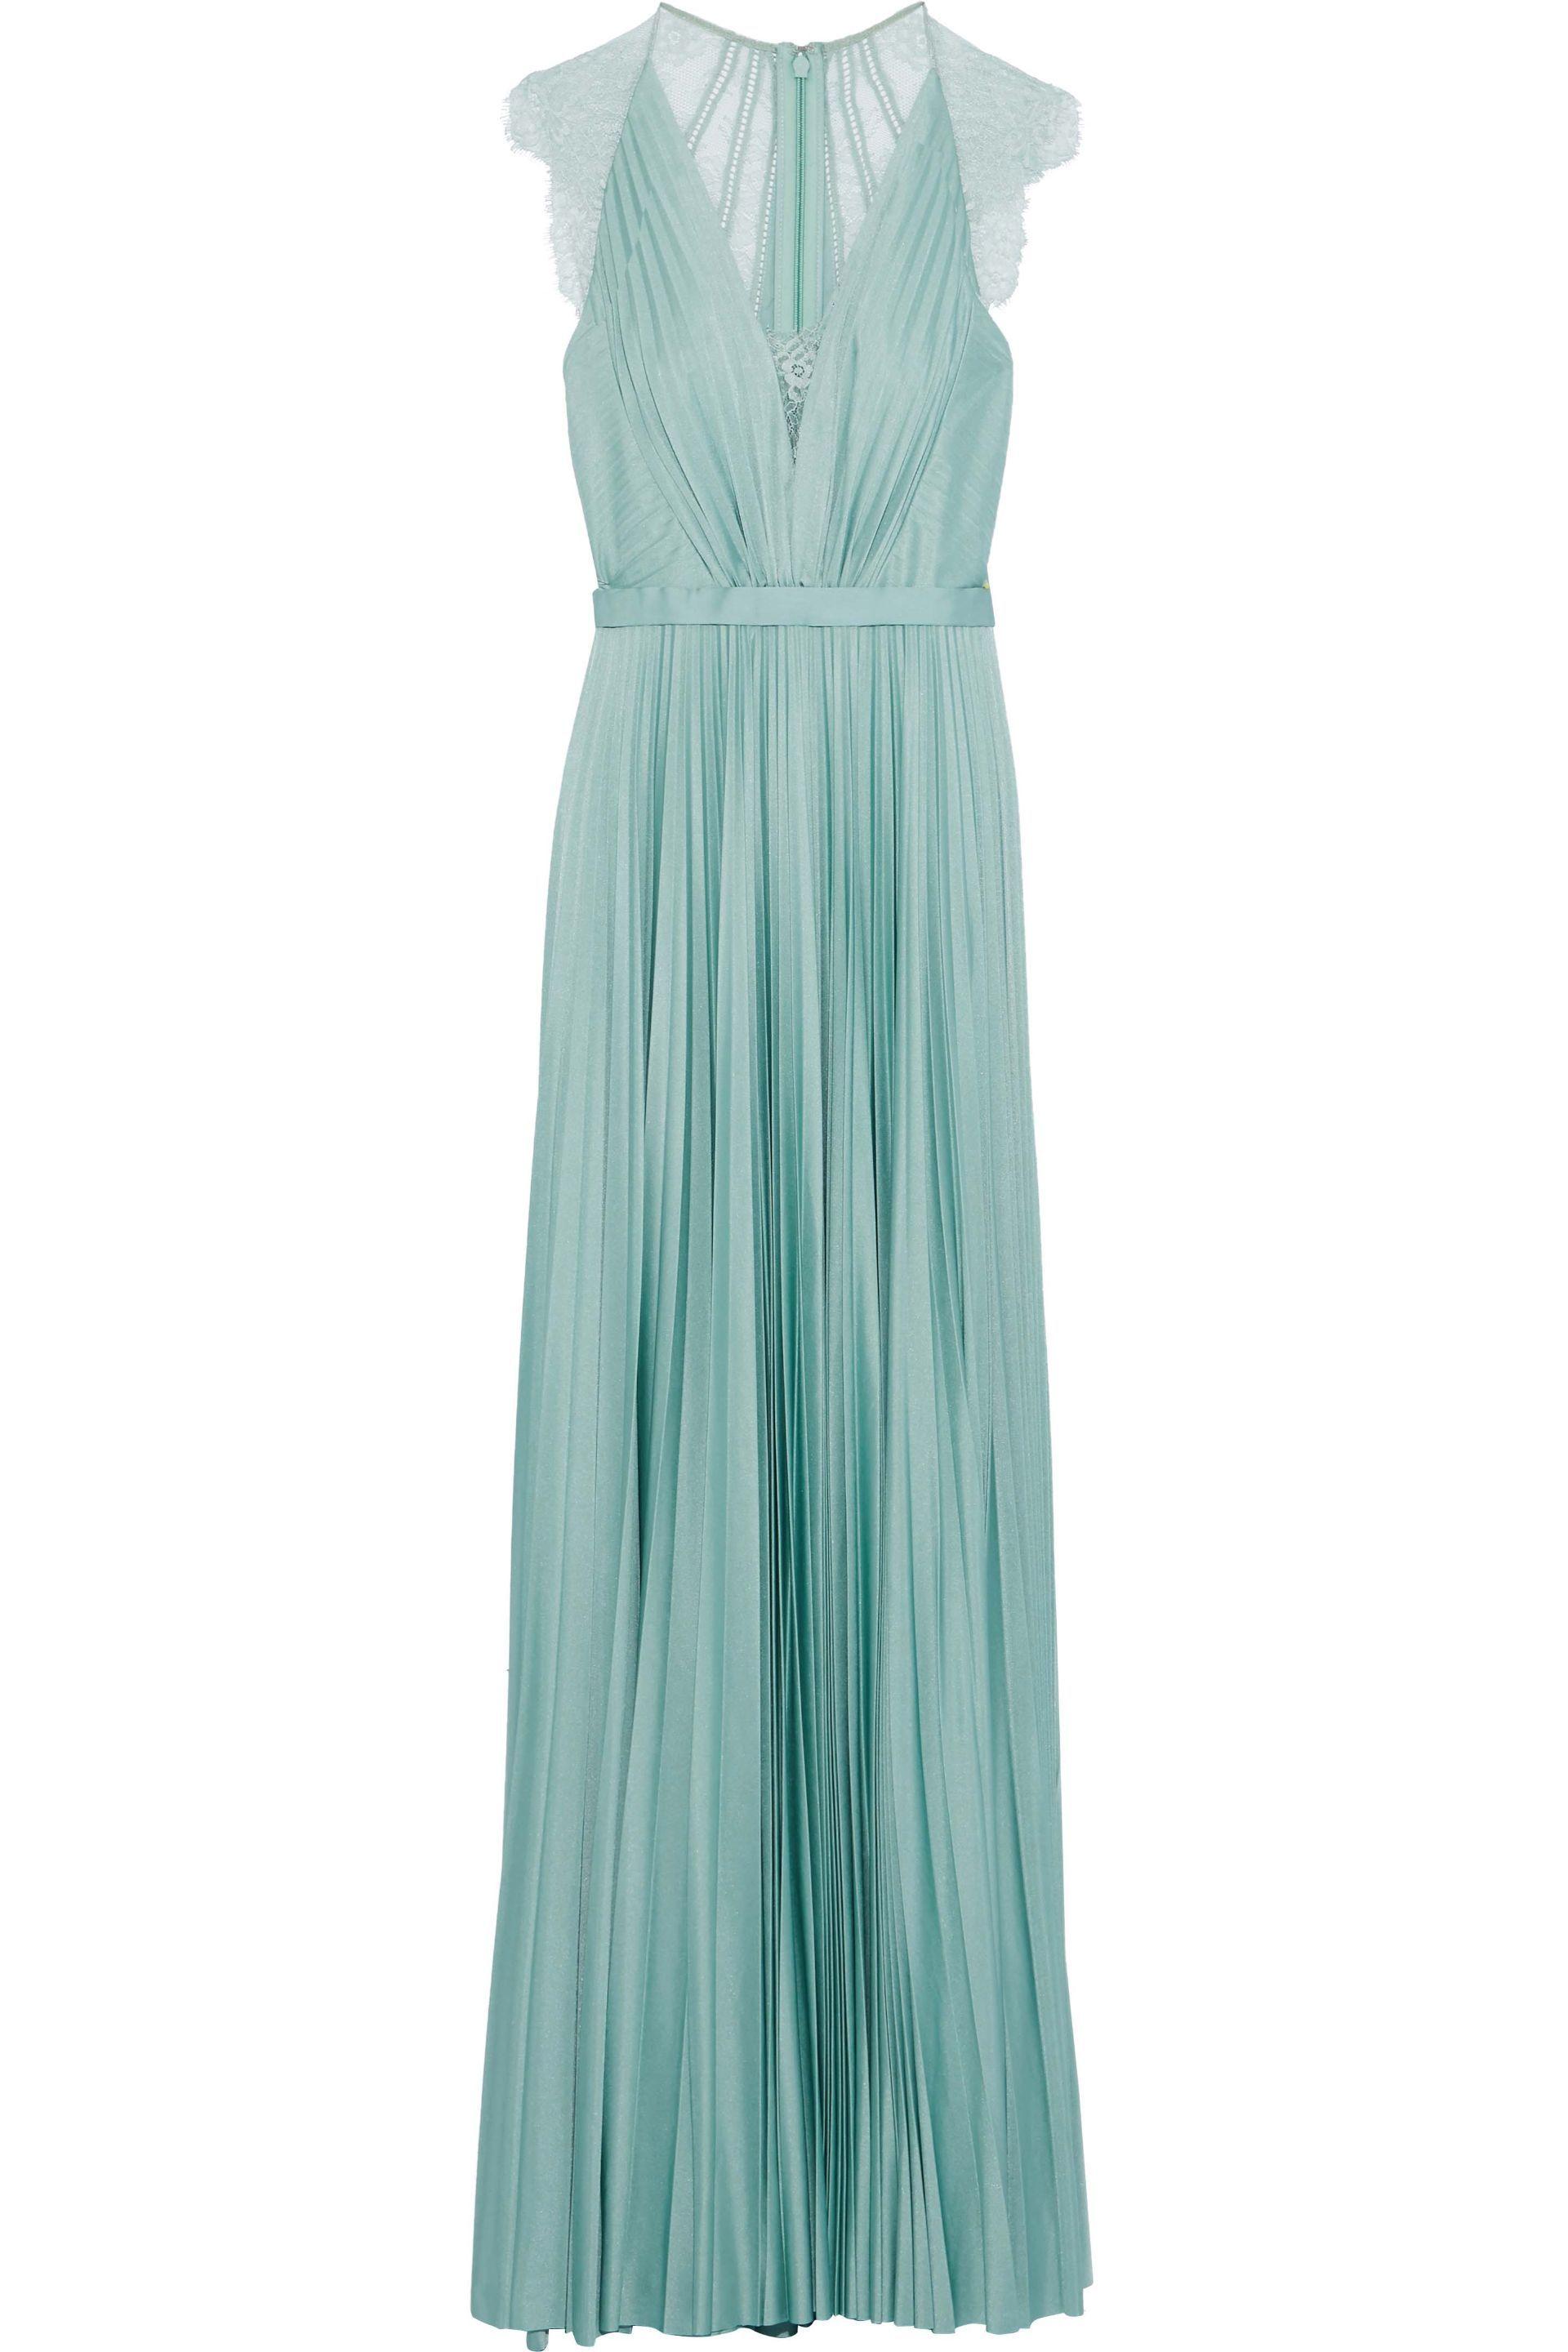 Catherine Deane Nelia Lace-paneled Pleated Satin Gown Grey Green - Lyst